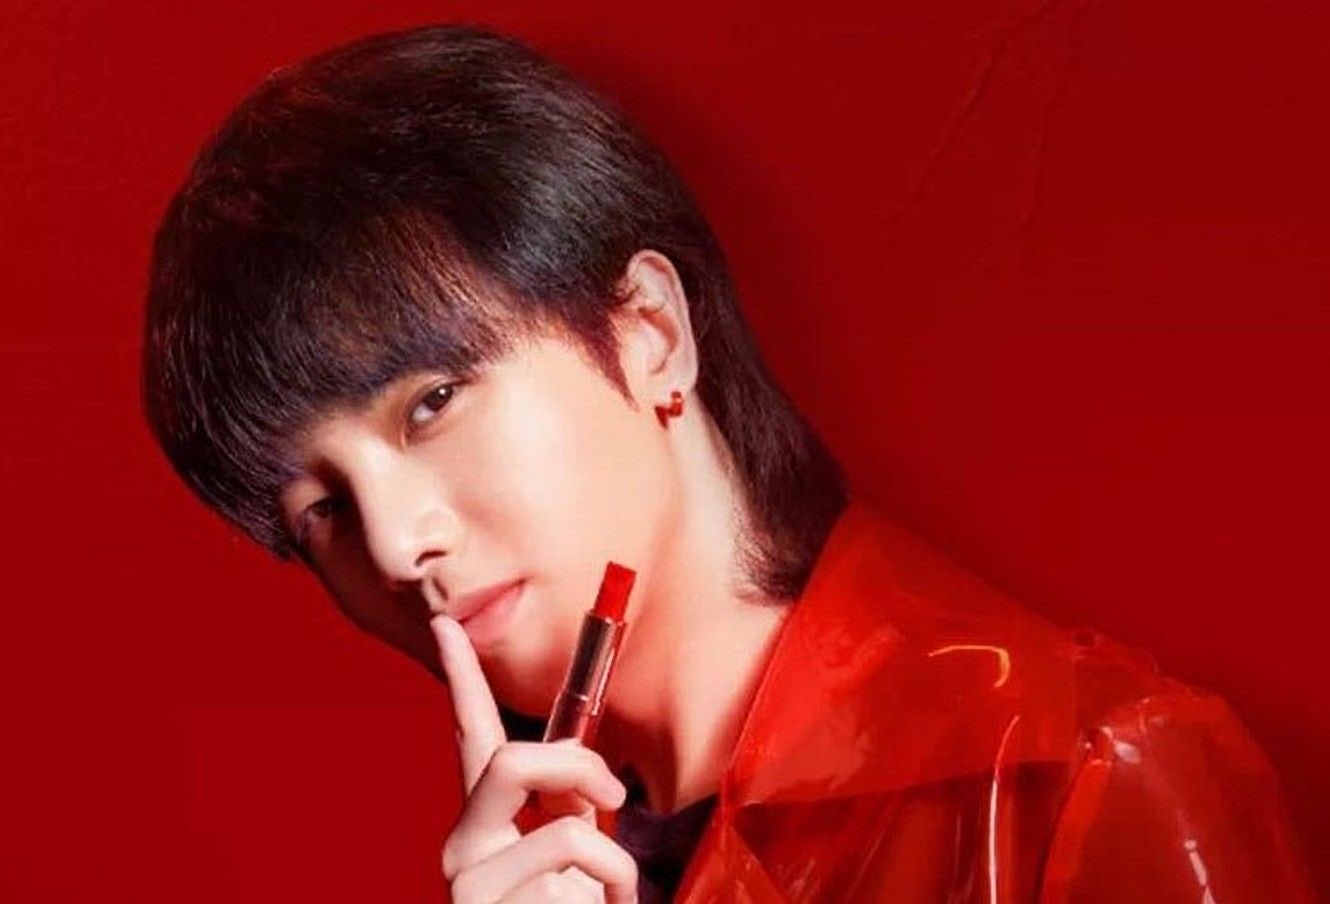 Hua Chenyu Thinks You Should Wear Red Estée Lauder Lipstick to His Concert